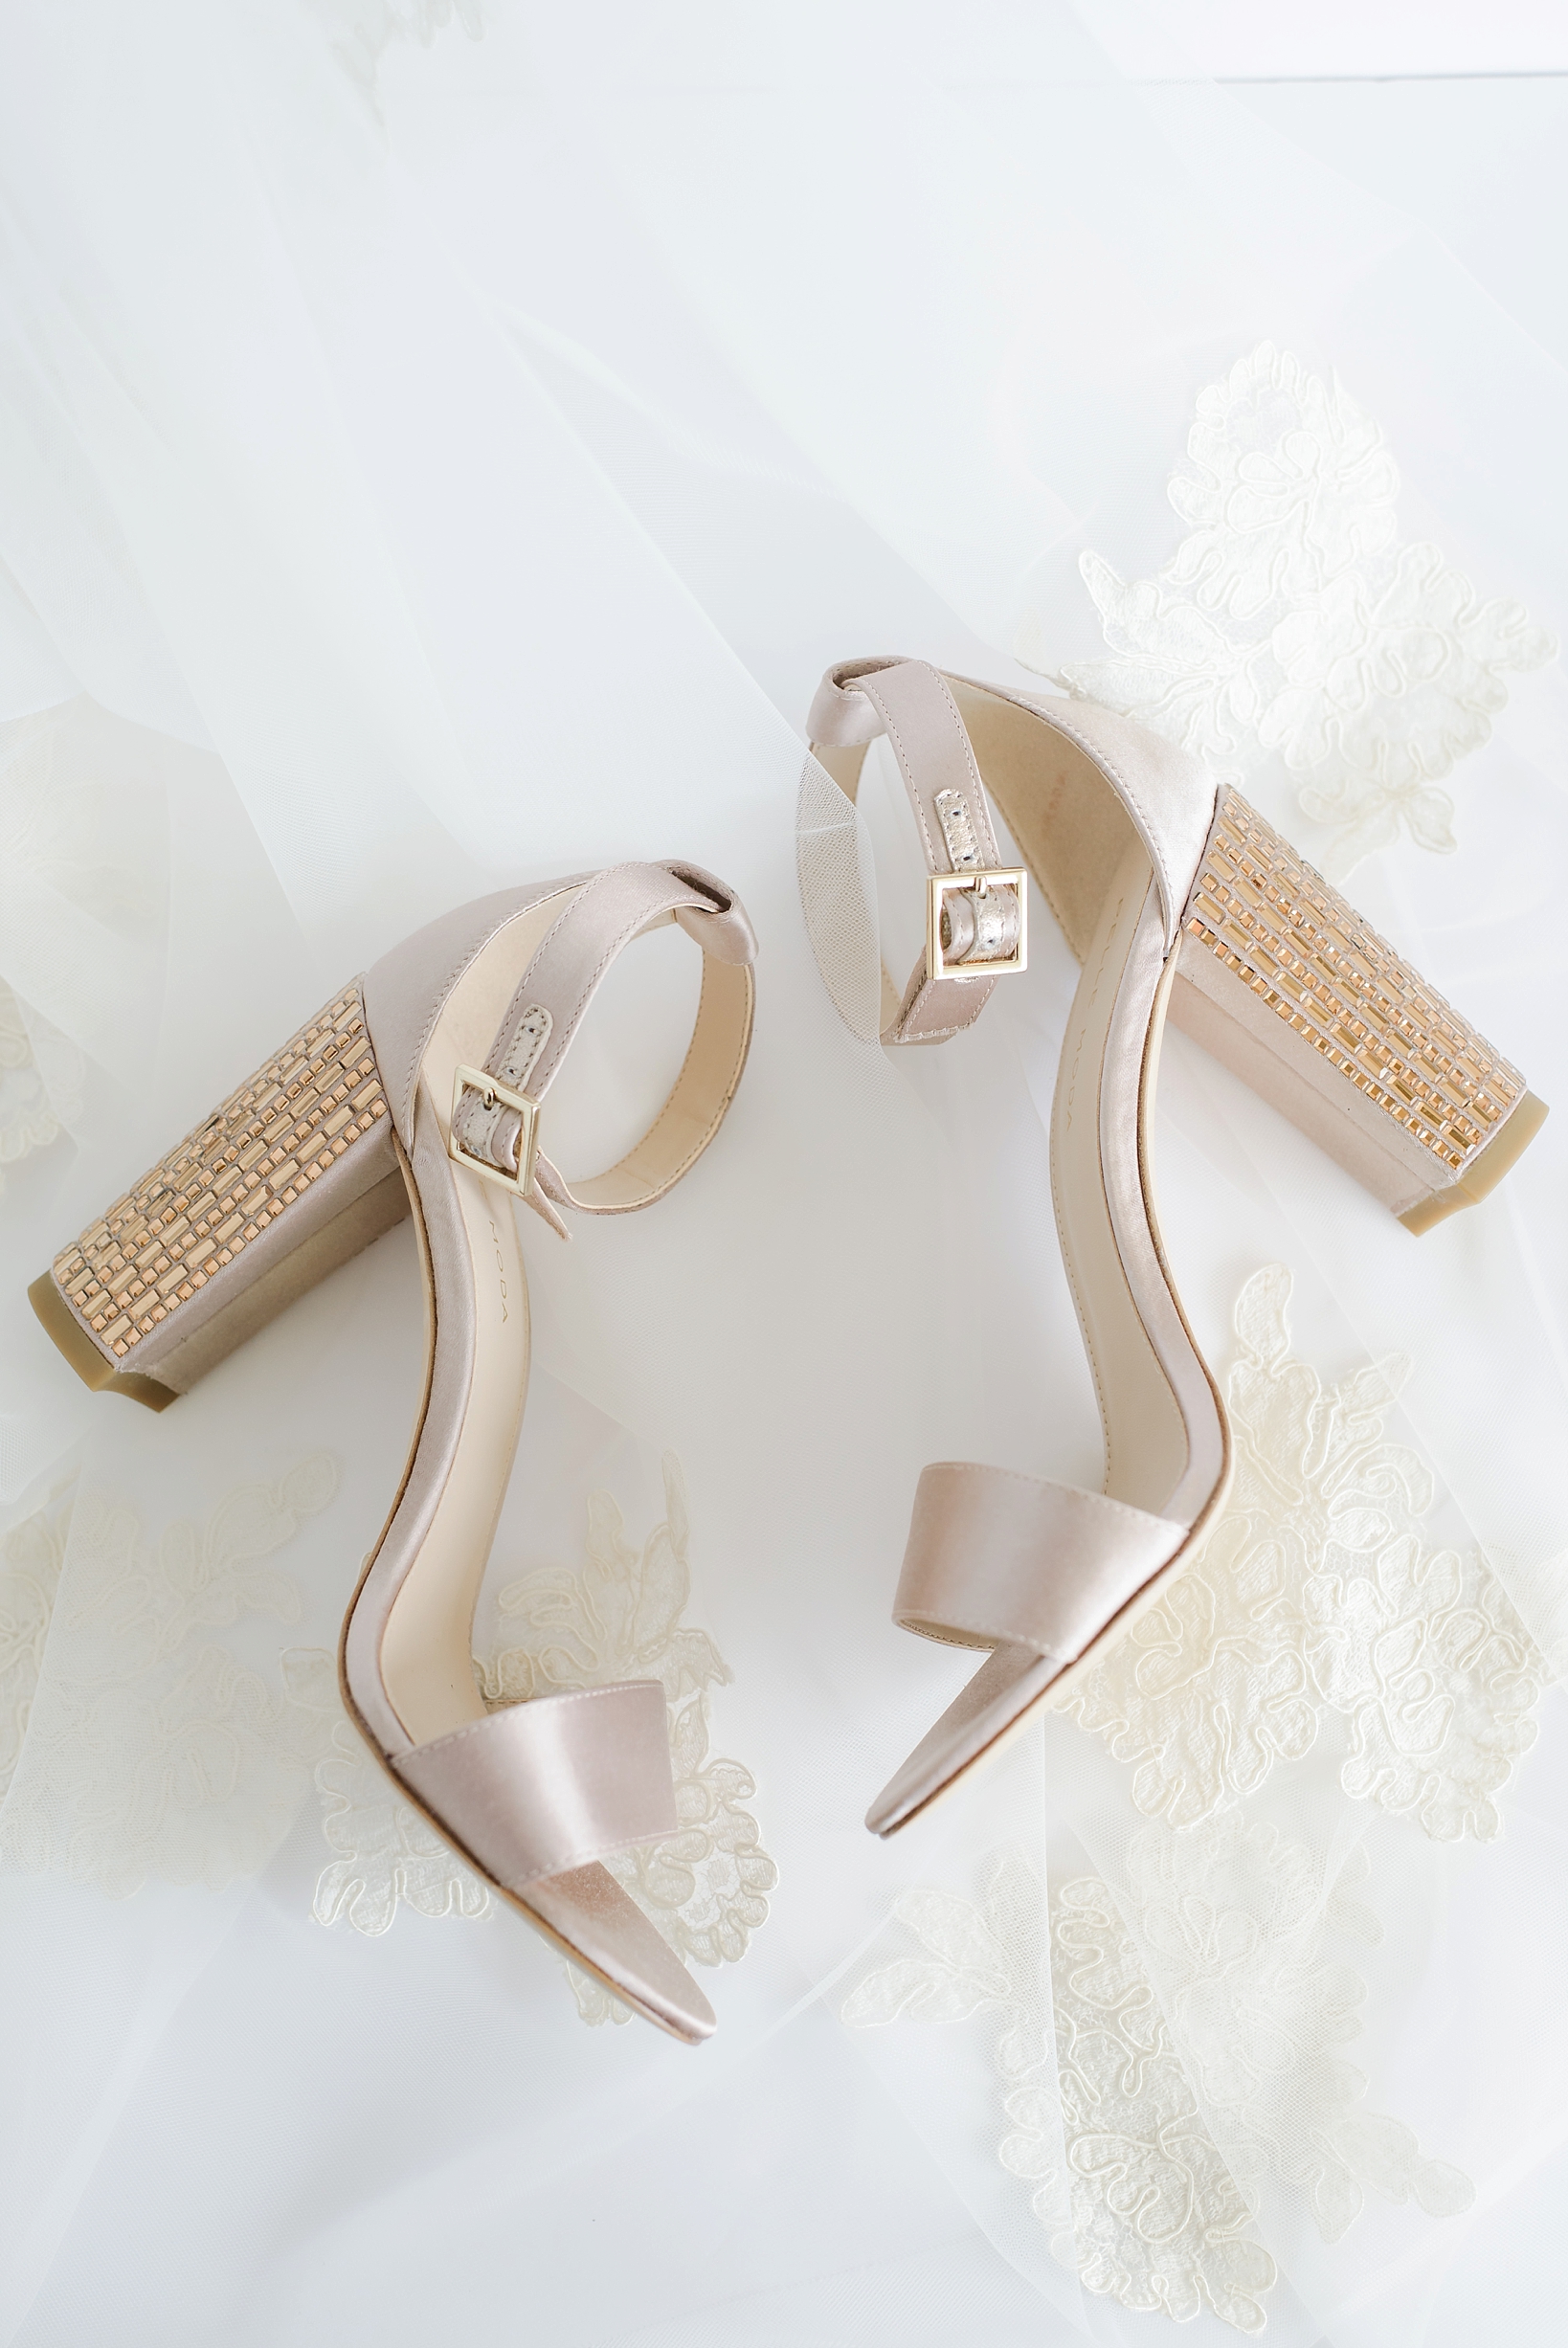 Bride's buckled shoes against the lace detail of her veil